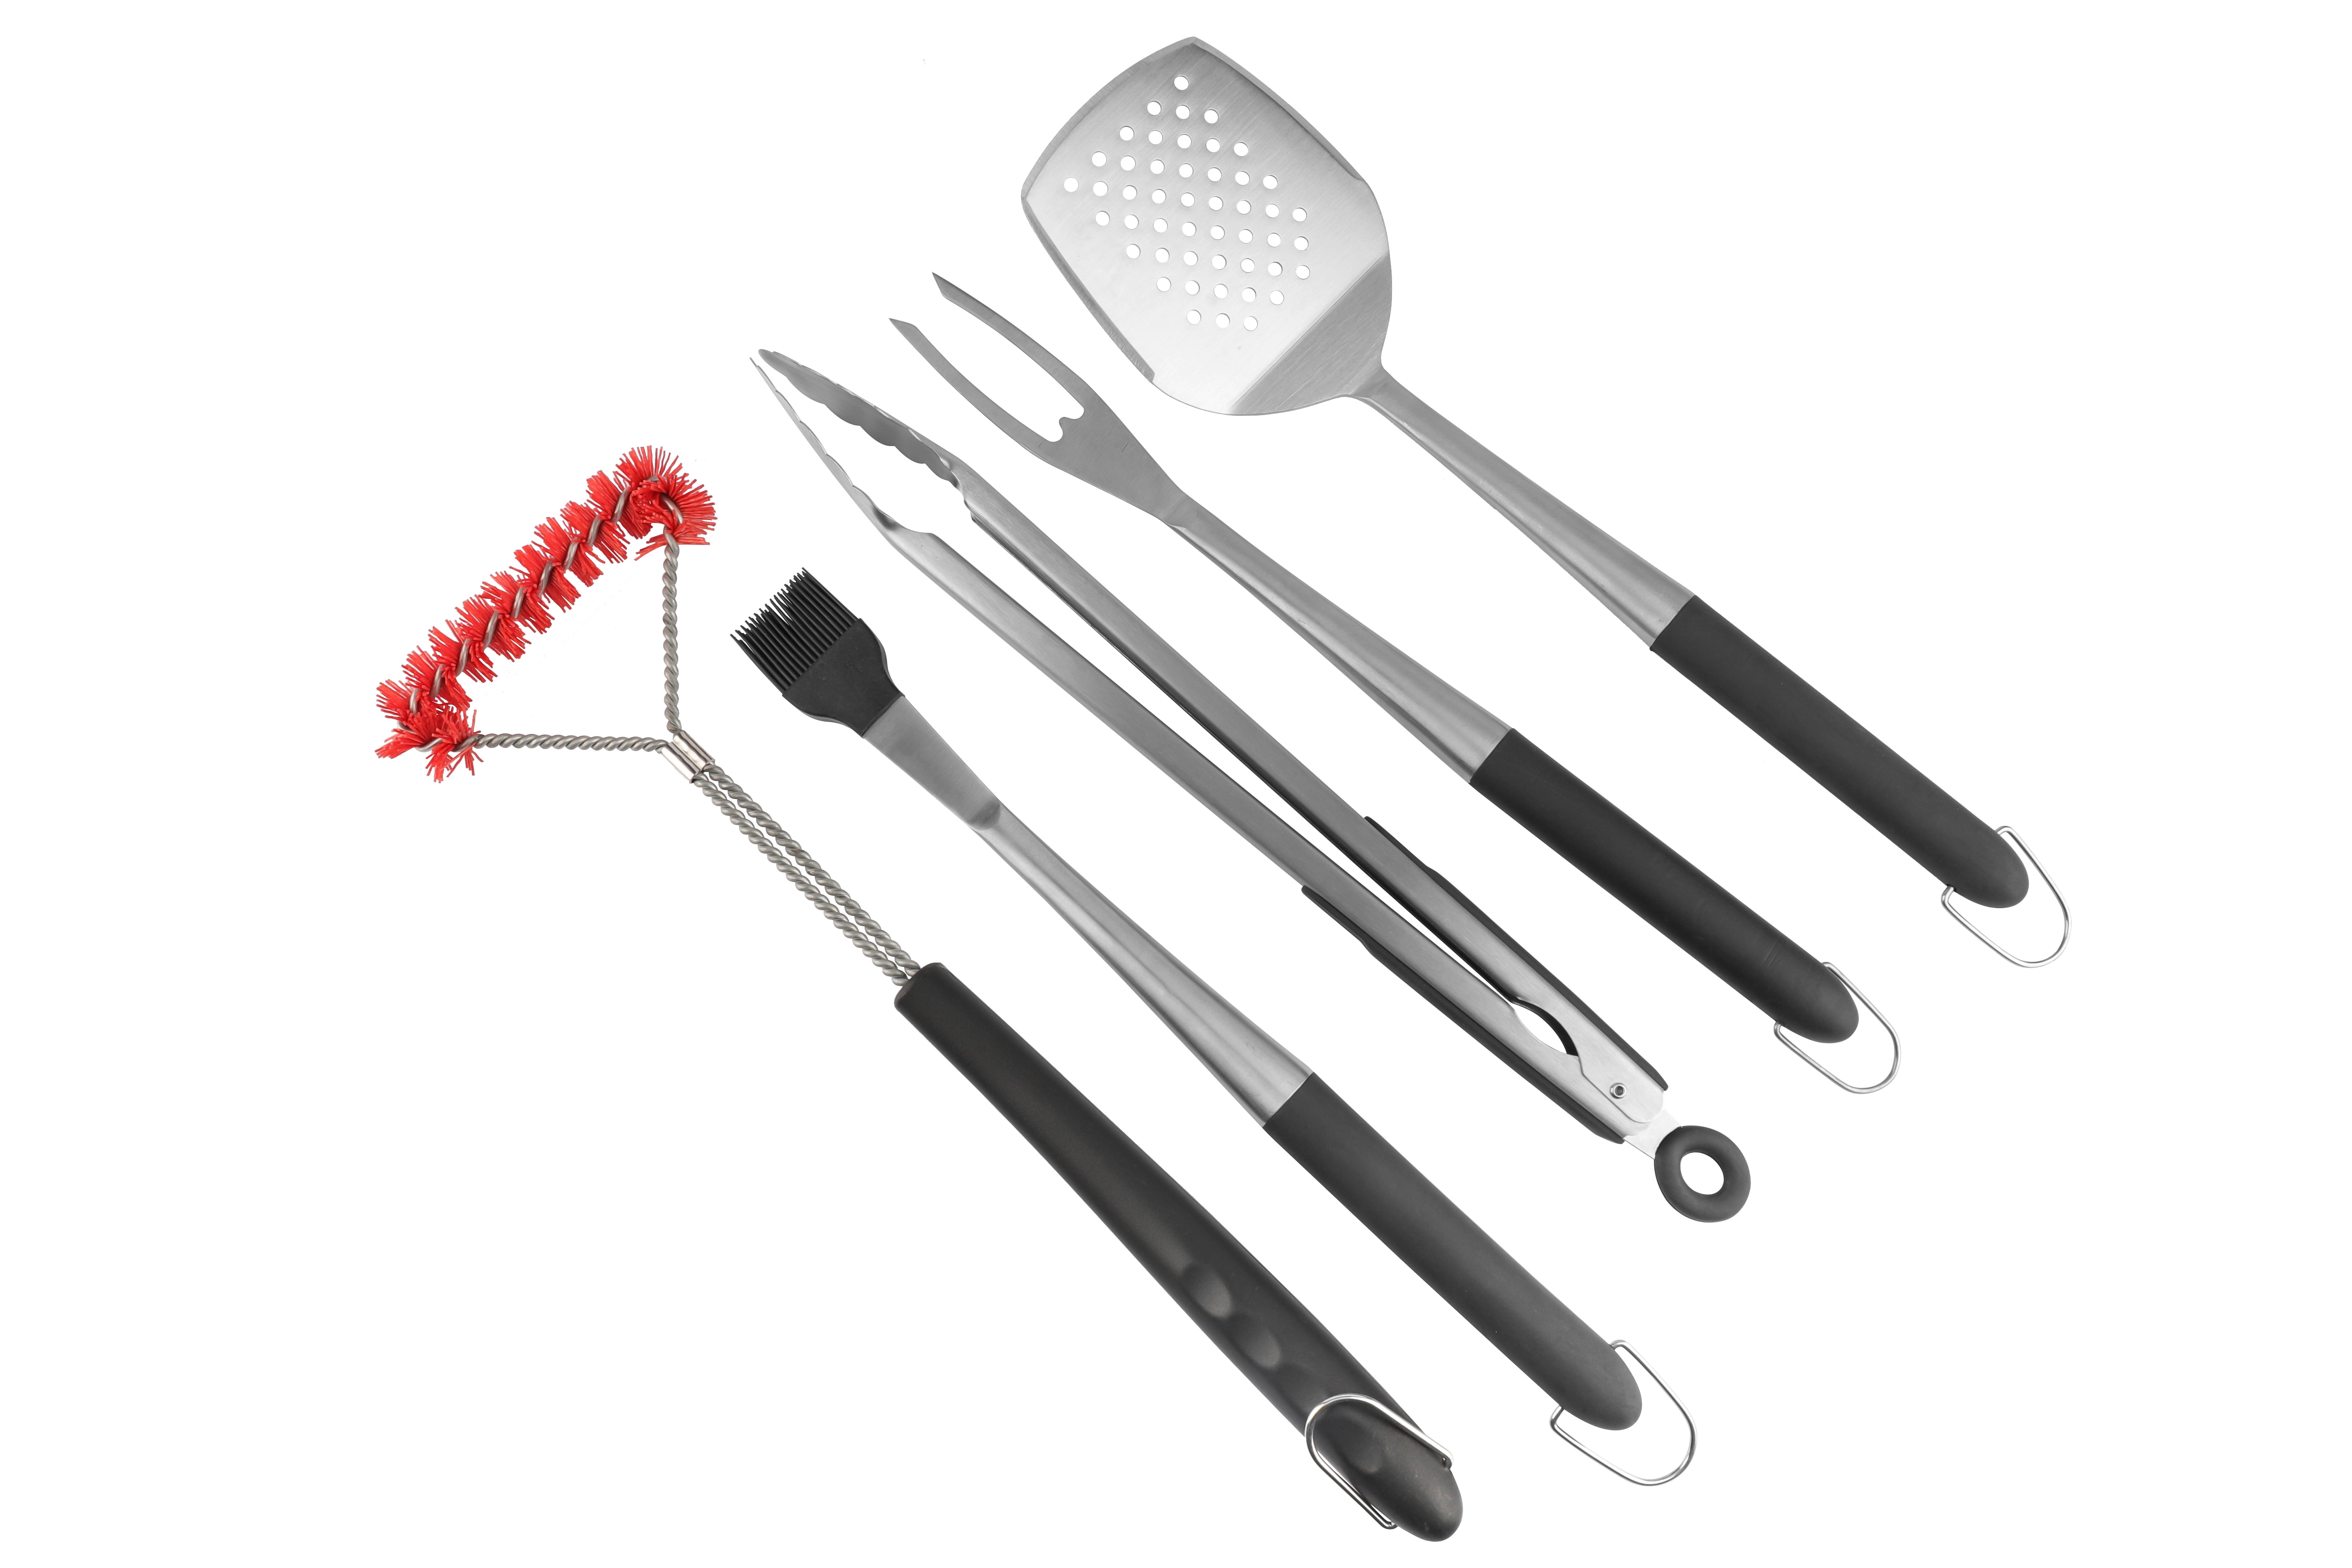 5 Pc BBQ Barbecue Set Apron Spatula Fork Gloves Tongs Roll Up Portable Bag Tools 